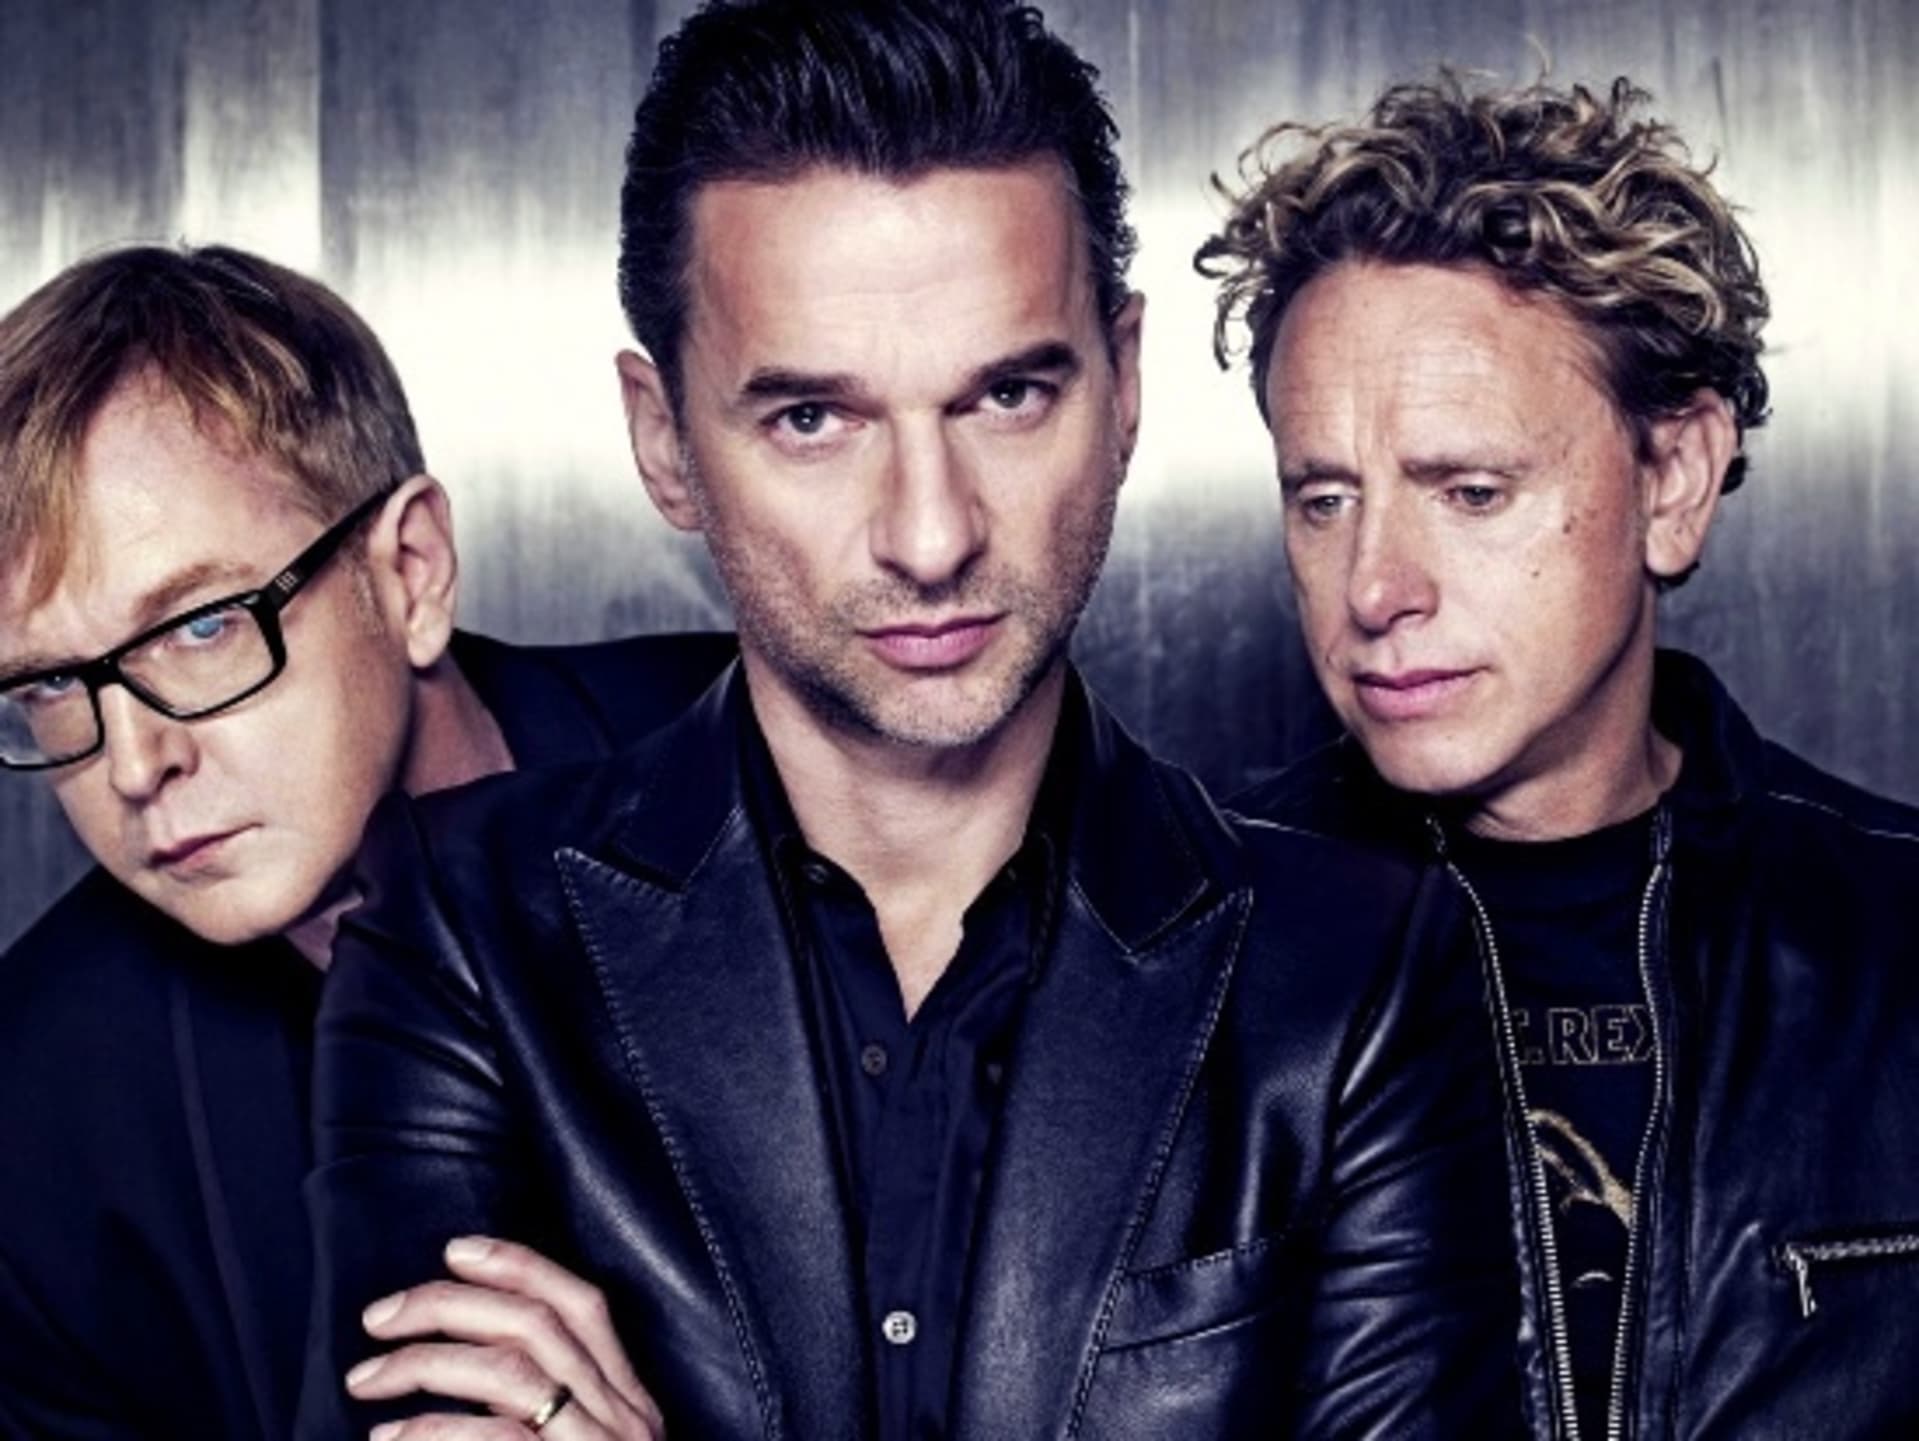 Win a pair of tickets to a free trip to see Depeche Mode in NYC